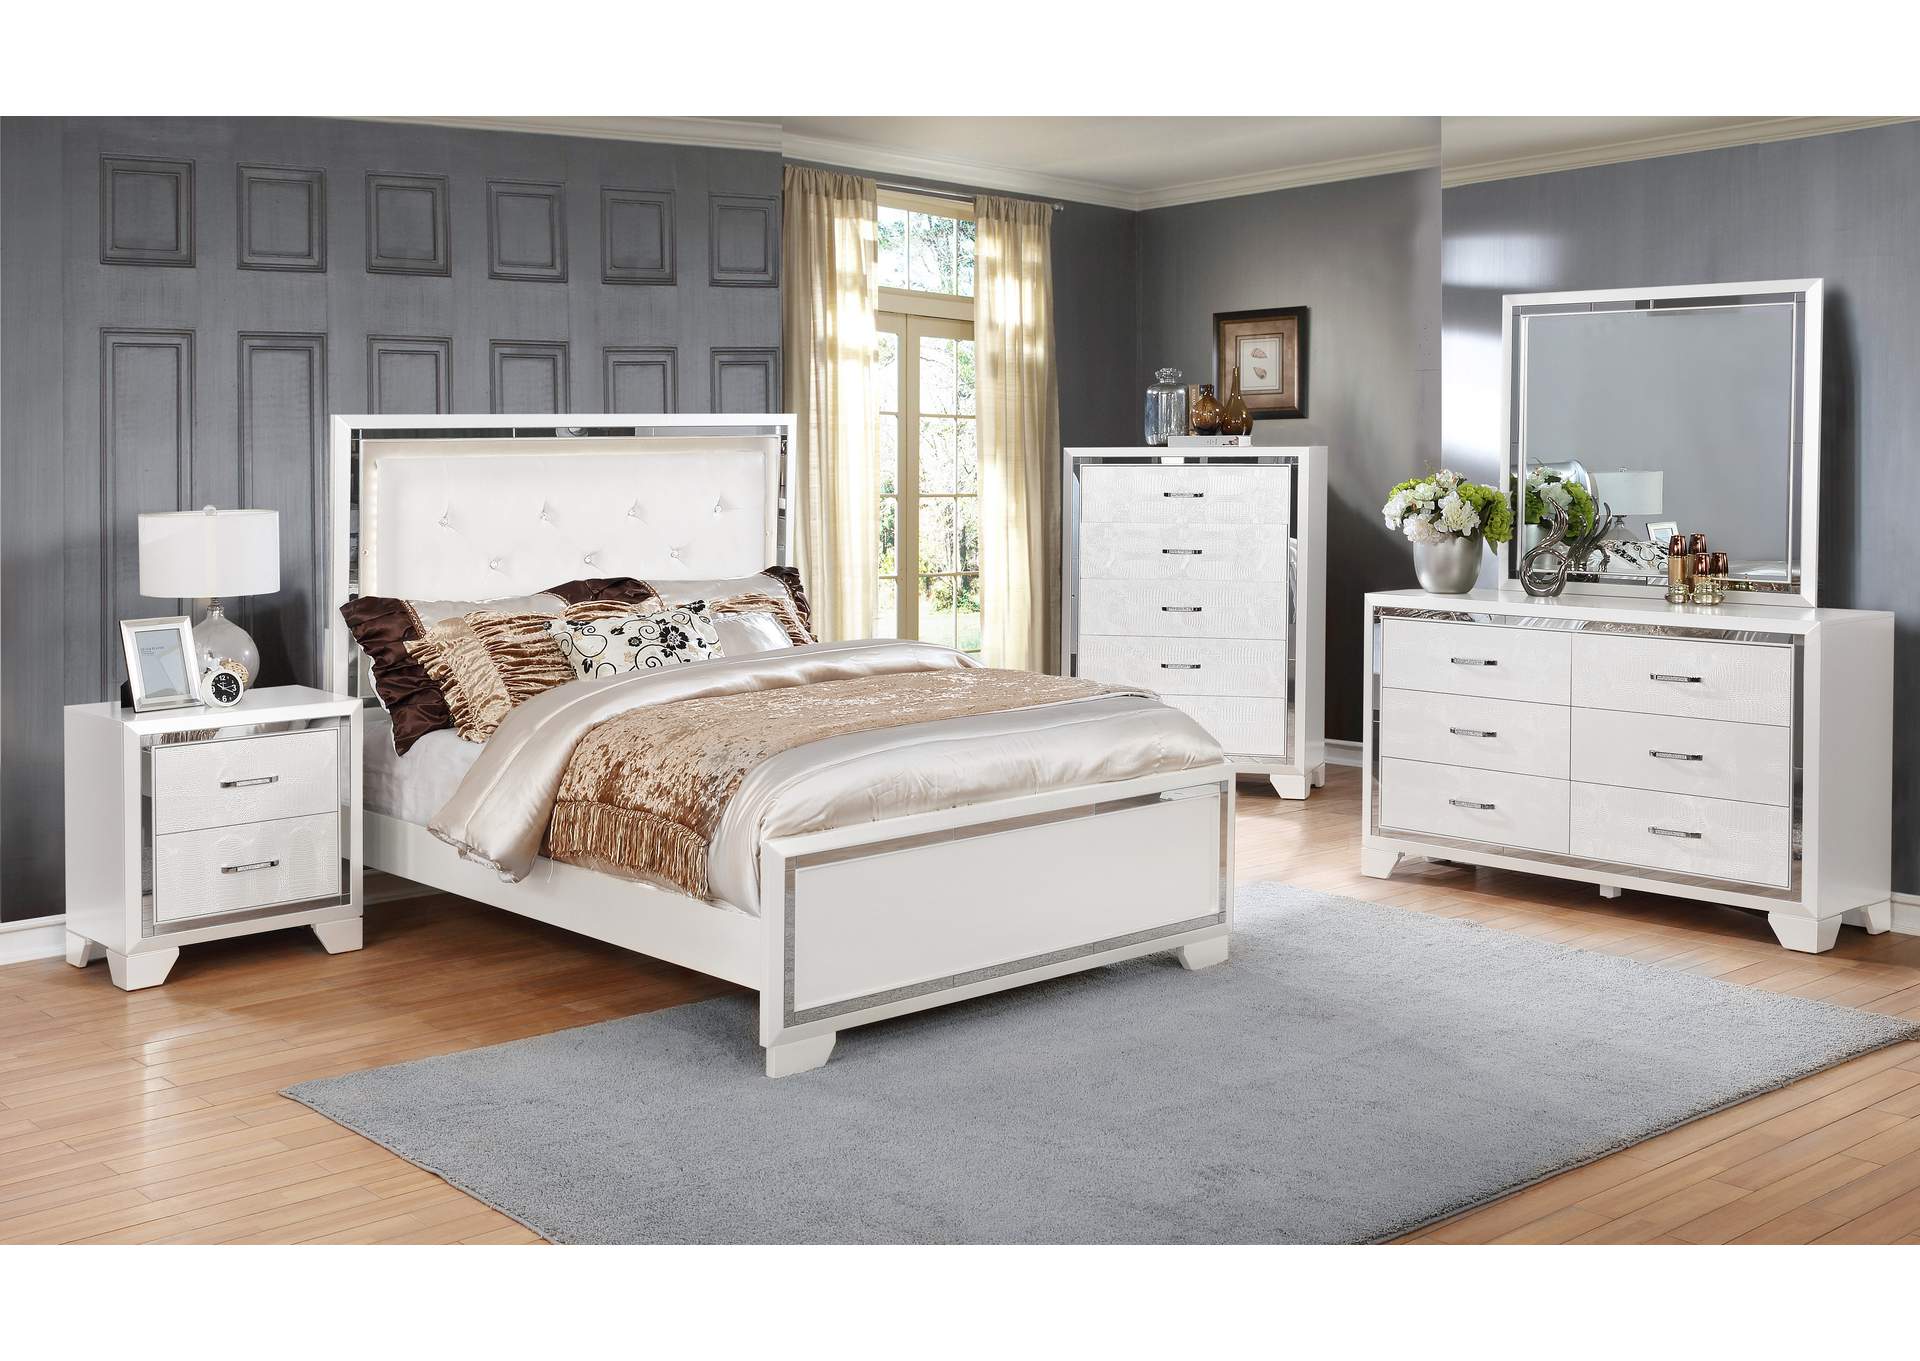 B591 4 Piece White Queen Bedroom Set Q - D - M - C,Global Trading